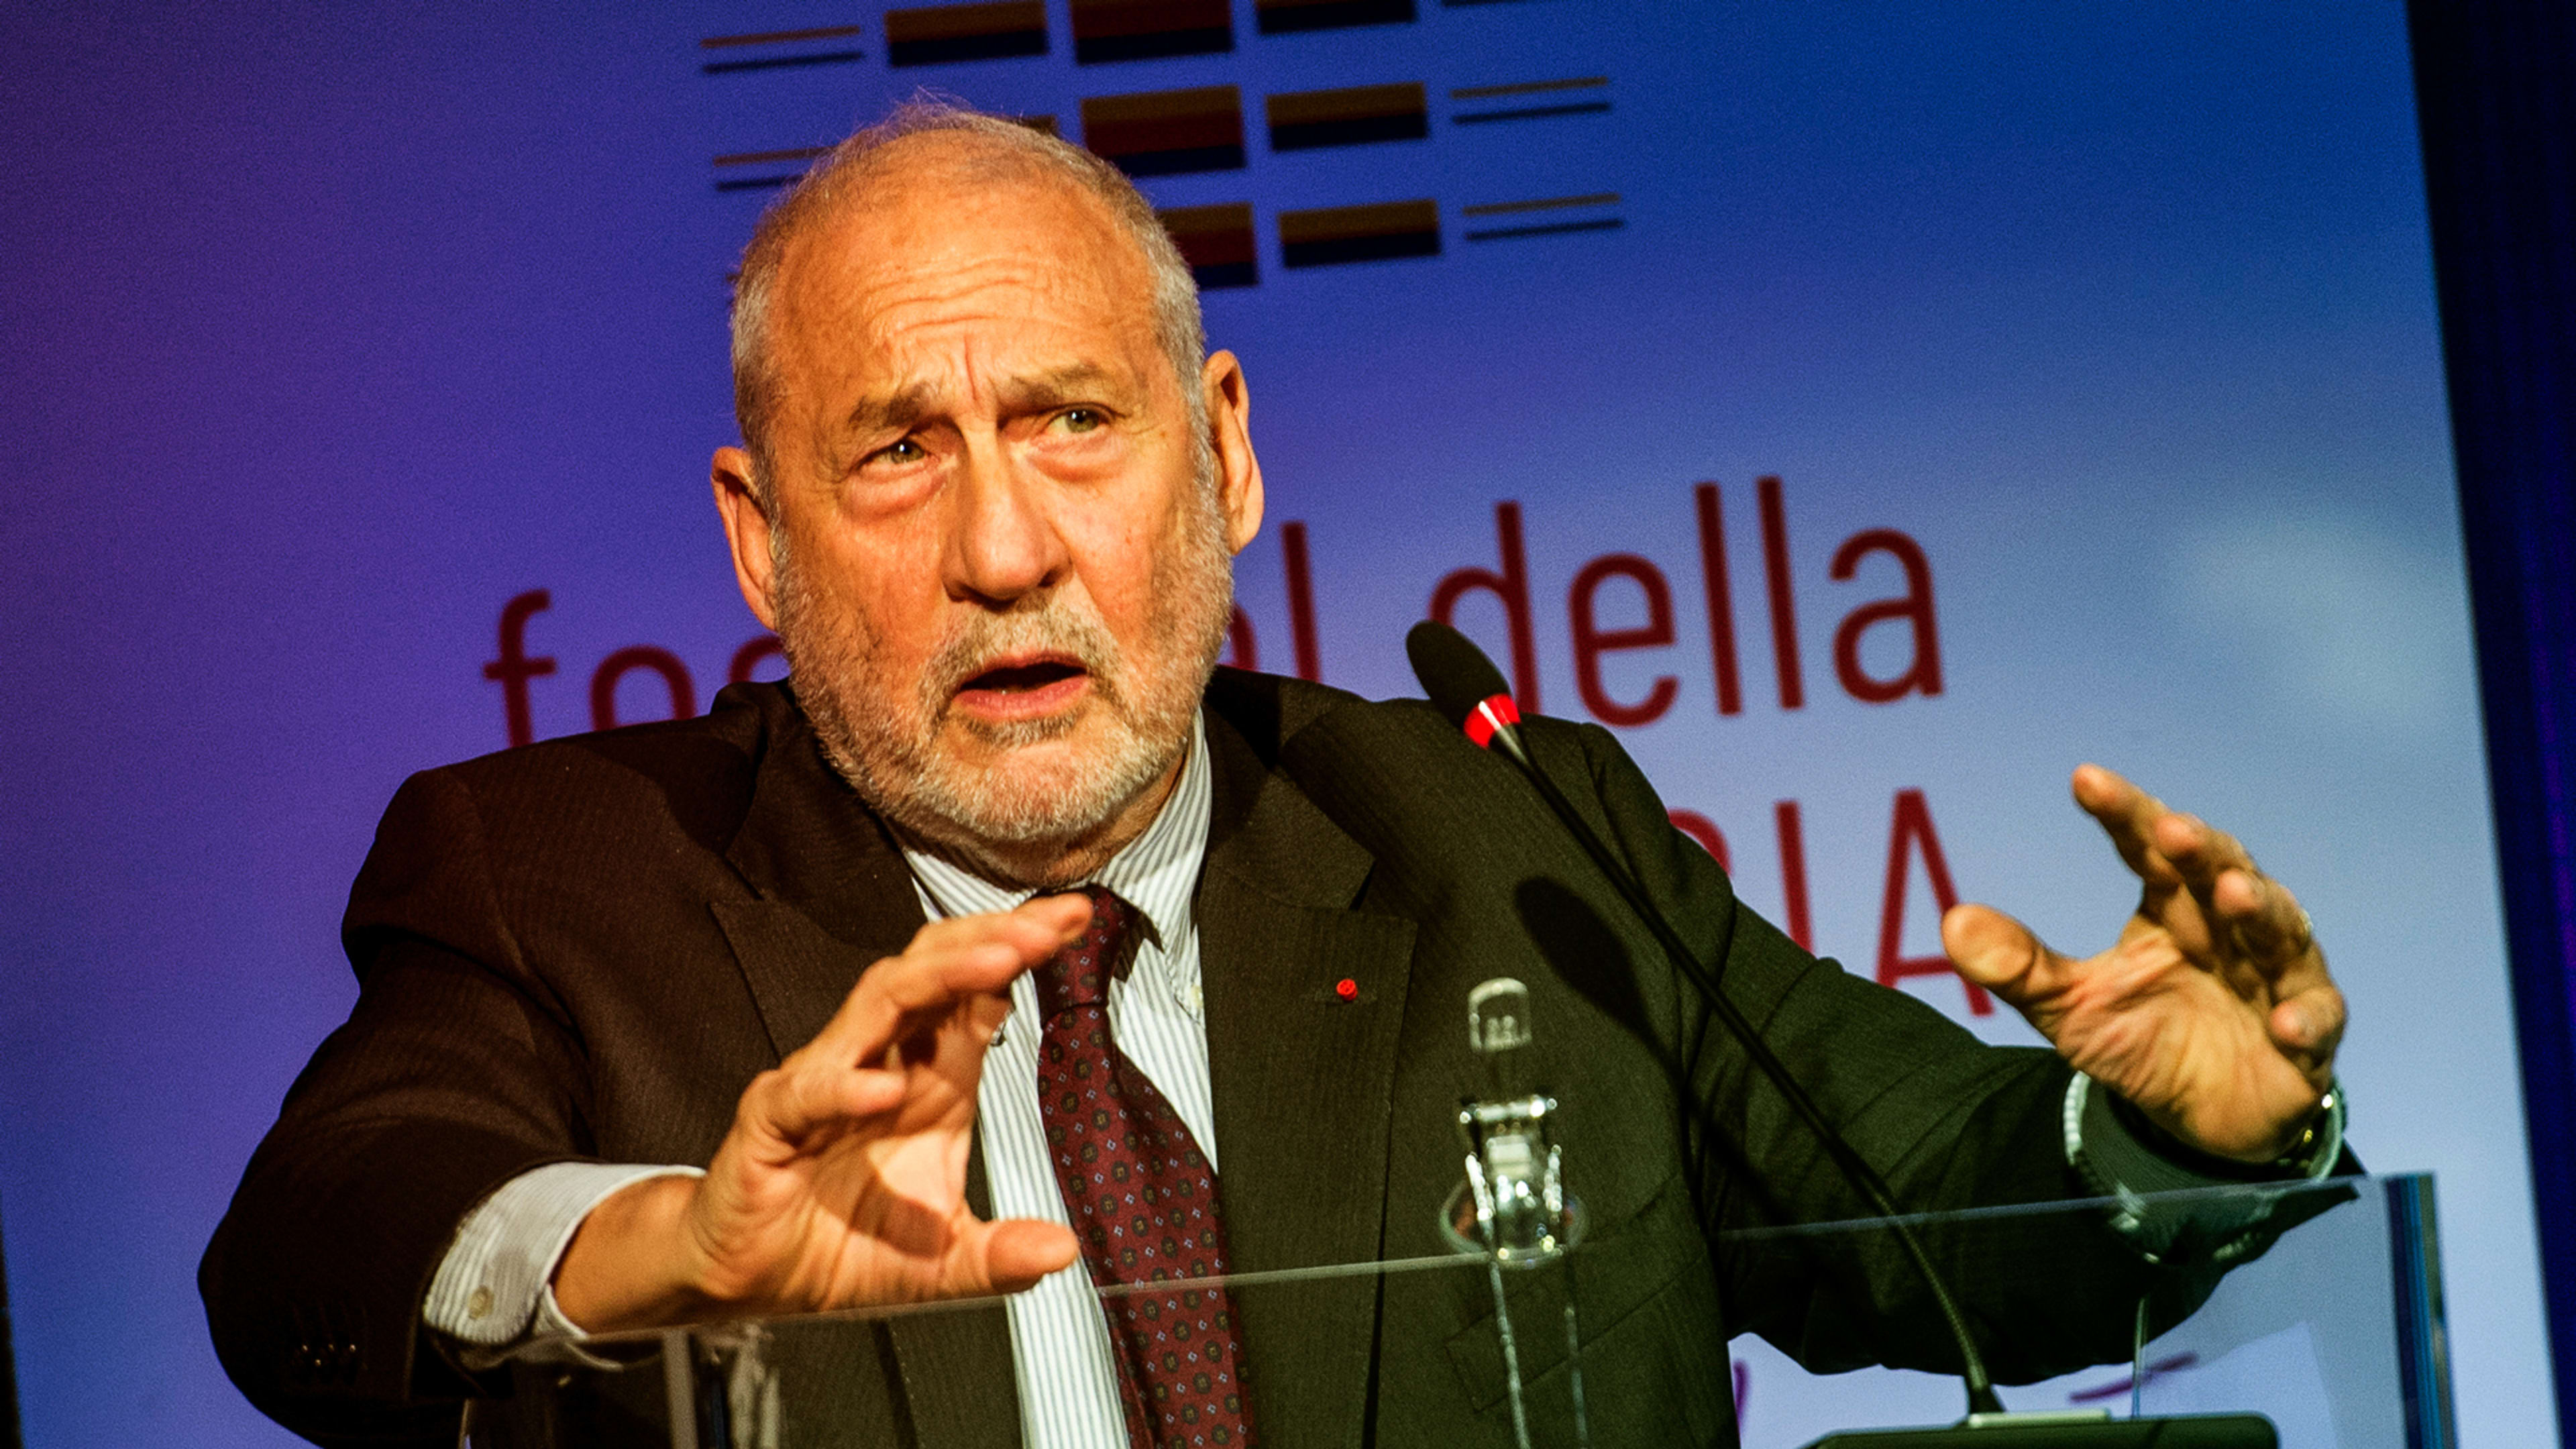 A Nobel-winning economist says it’s time to kill the GDP